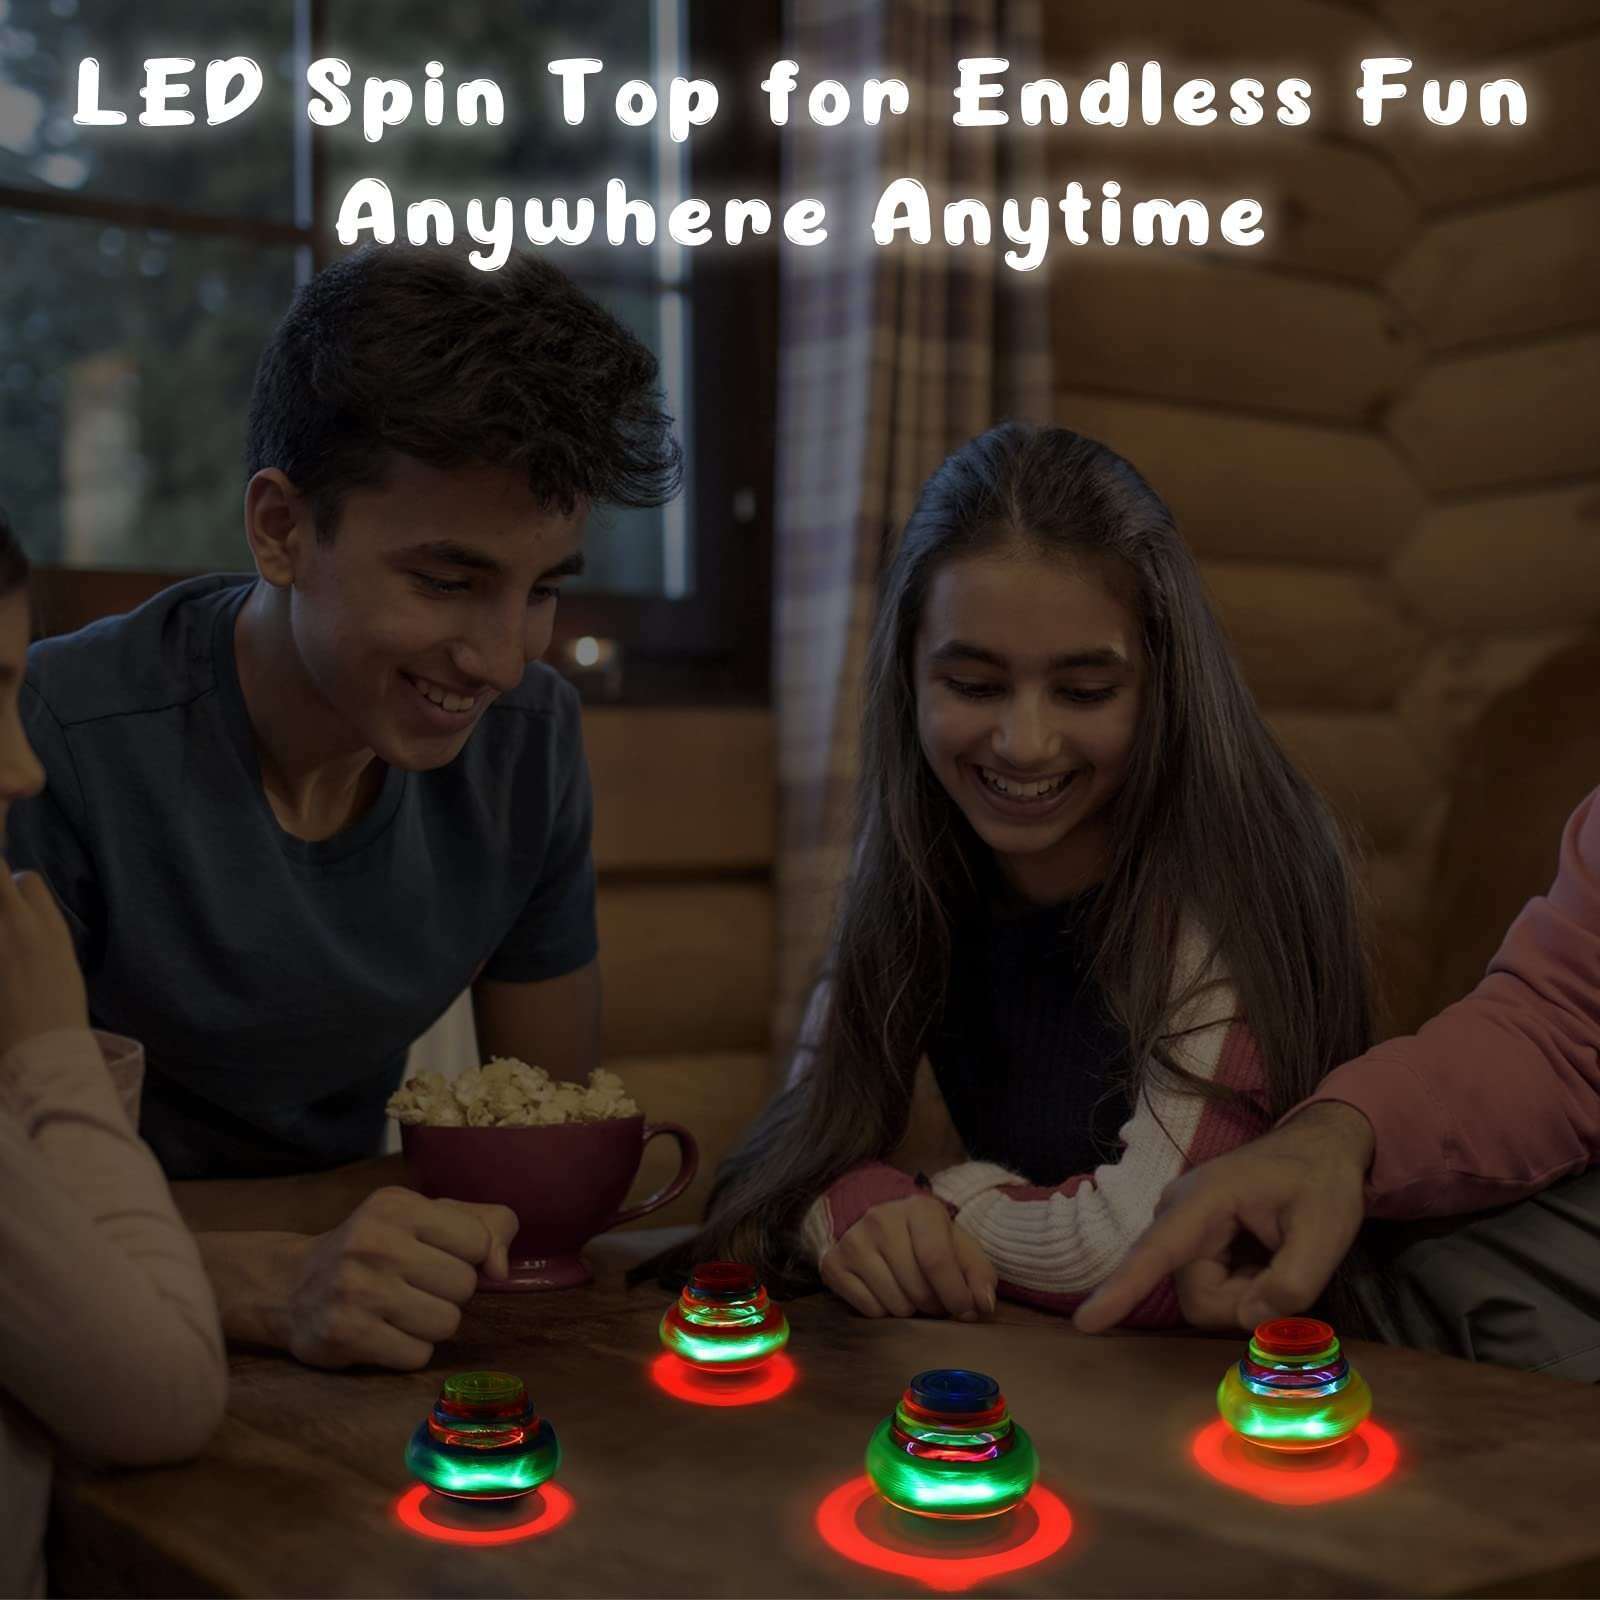 BIG SALE - 50% OFF Music Flashing Spinners Toy With Launcher